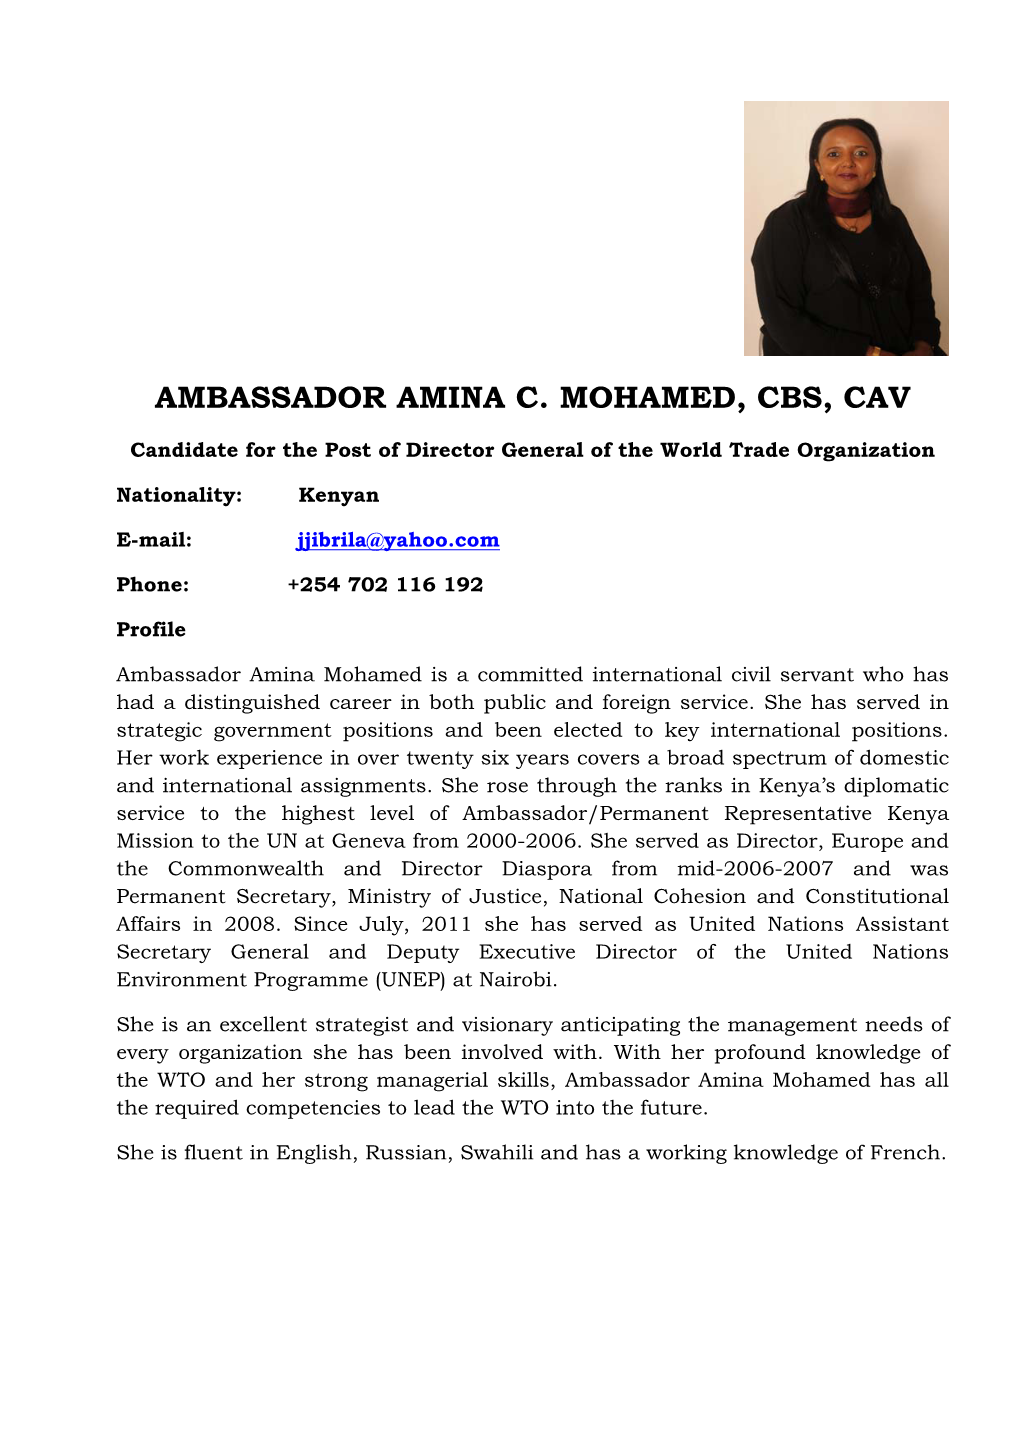 Amina Mohamed Is a Committed International Civil Servant Who Has Had a Distinguished Career in Both Public and Foreign Service